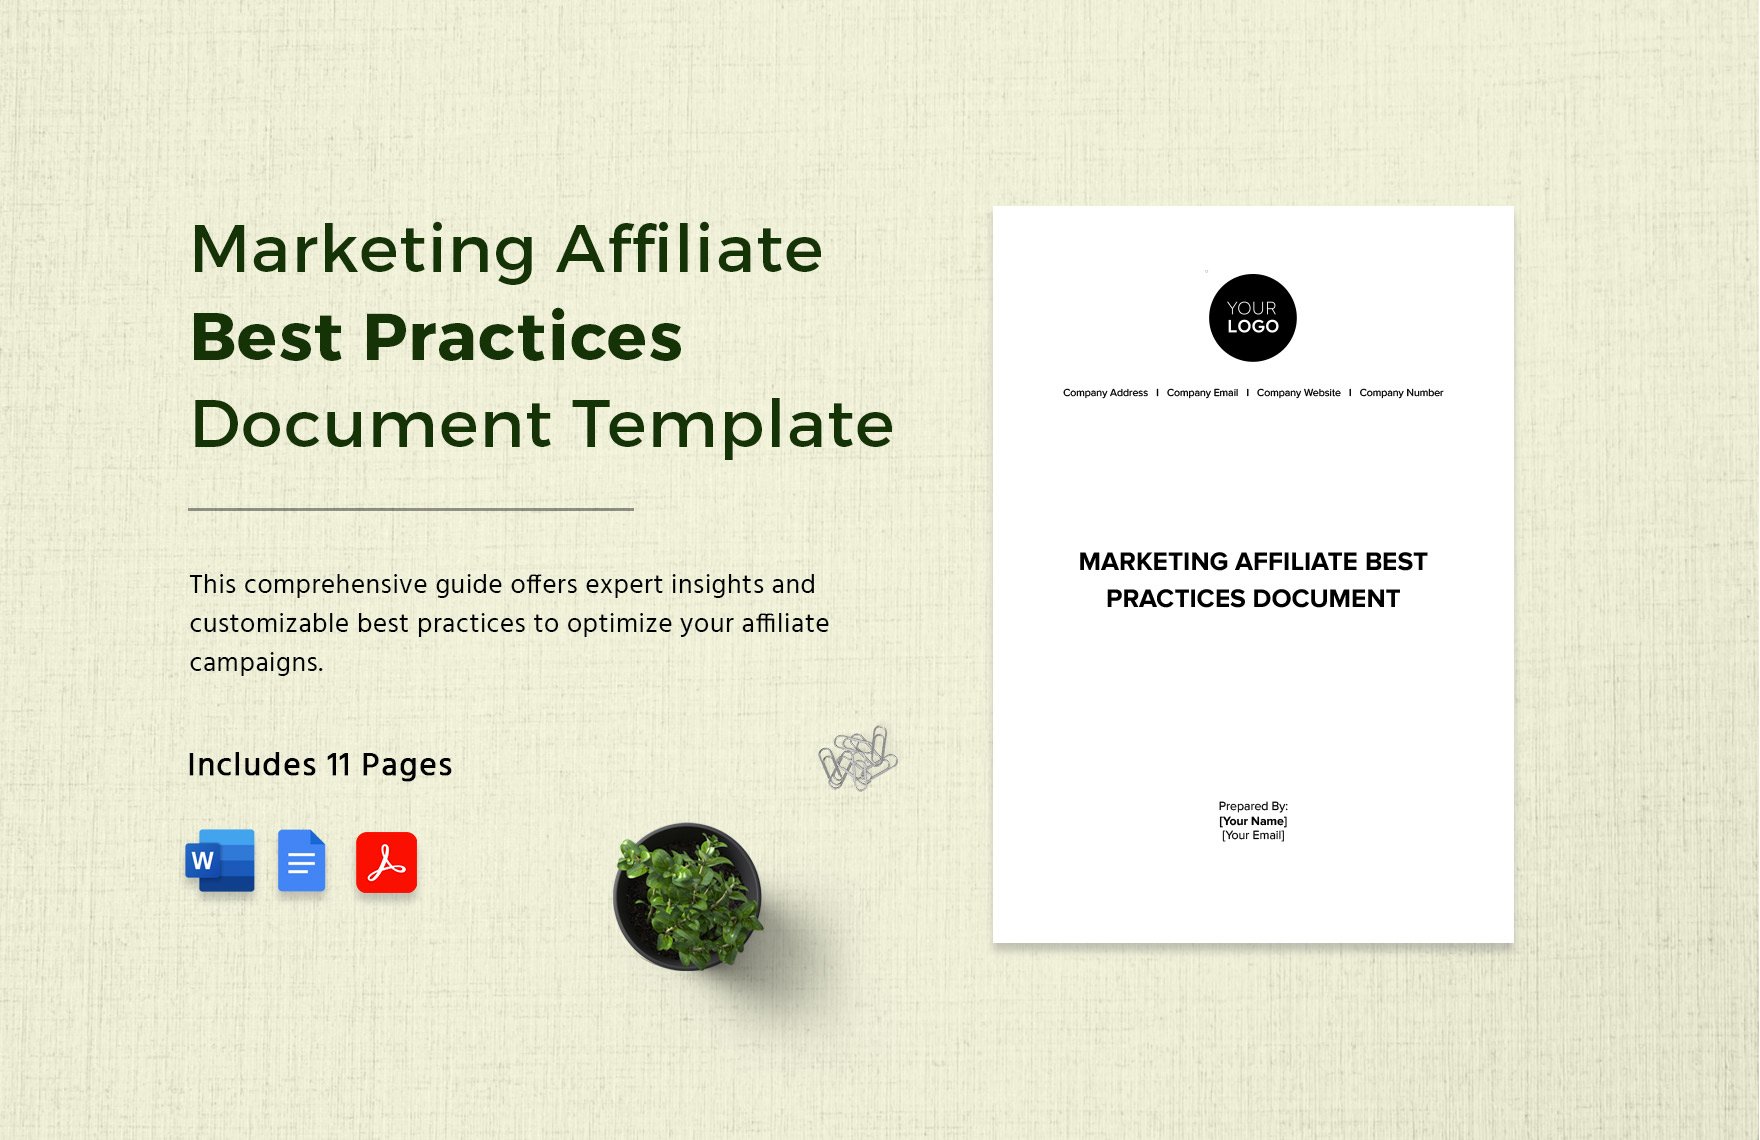 Marketing Affiliate Best Practices Document Template in Word, Google Docs, PDF